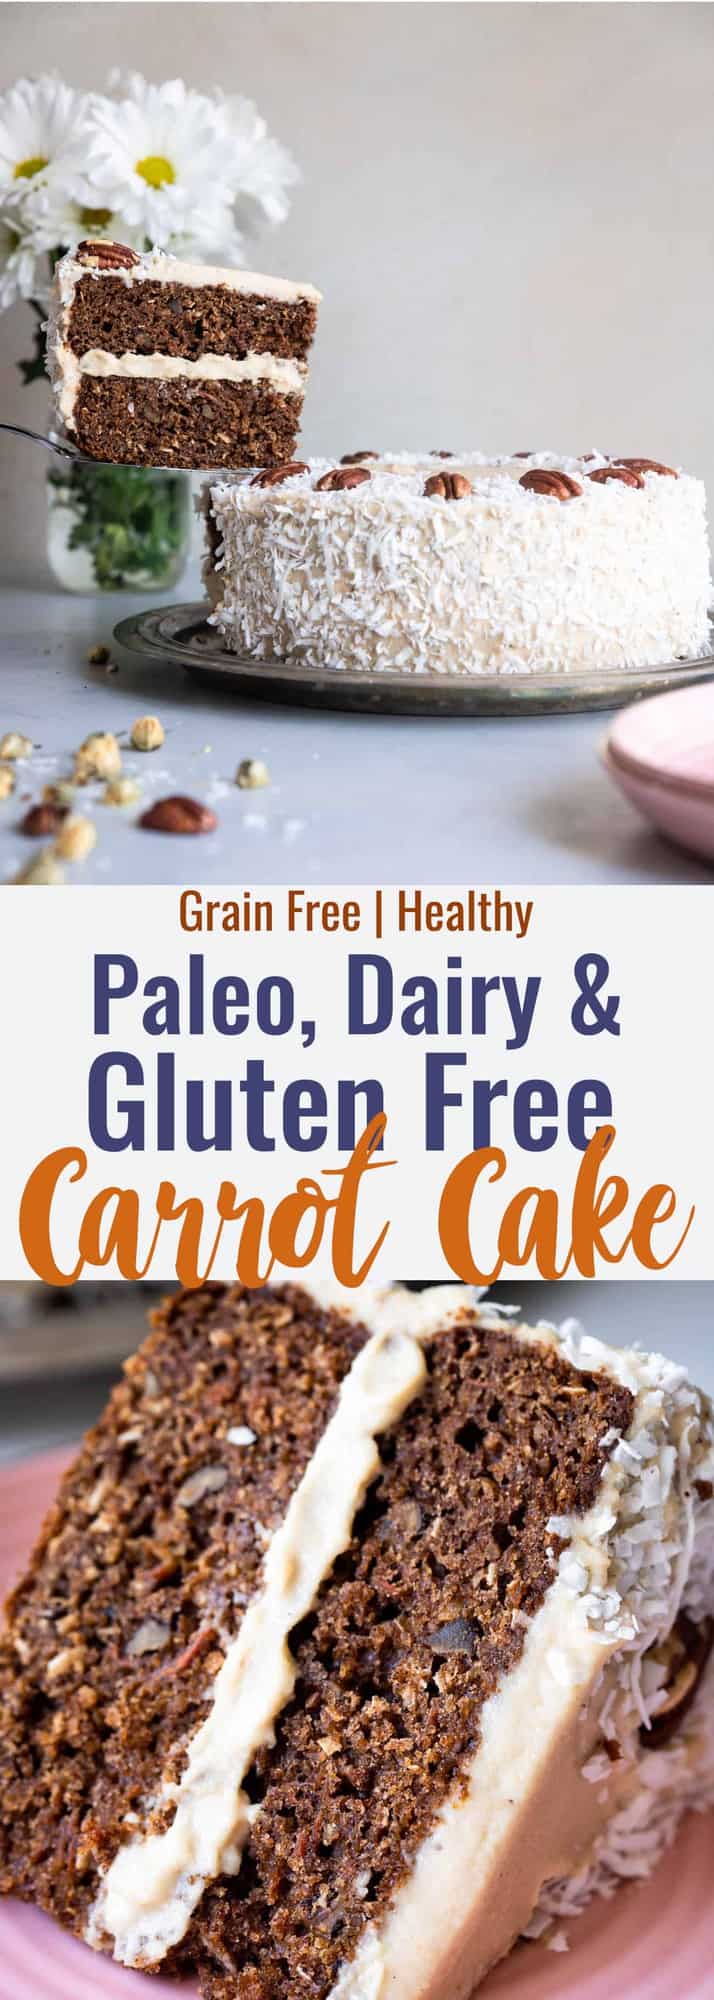 Paleo Carrot Cake - This dairy, grain and gluten free, Paleo Carrot Cake with Almond Flour has a luscious cashew 